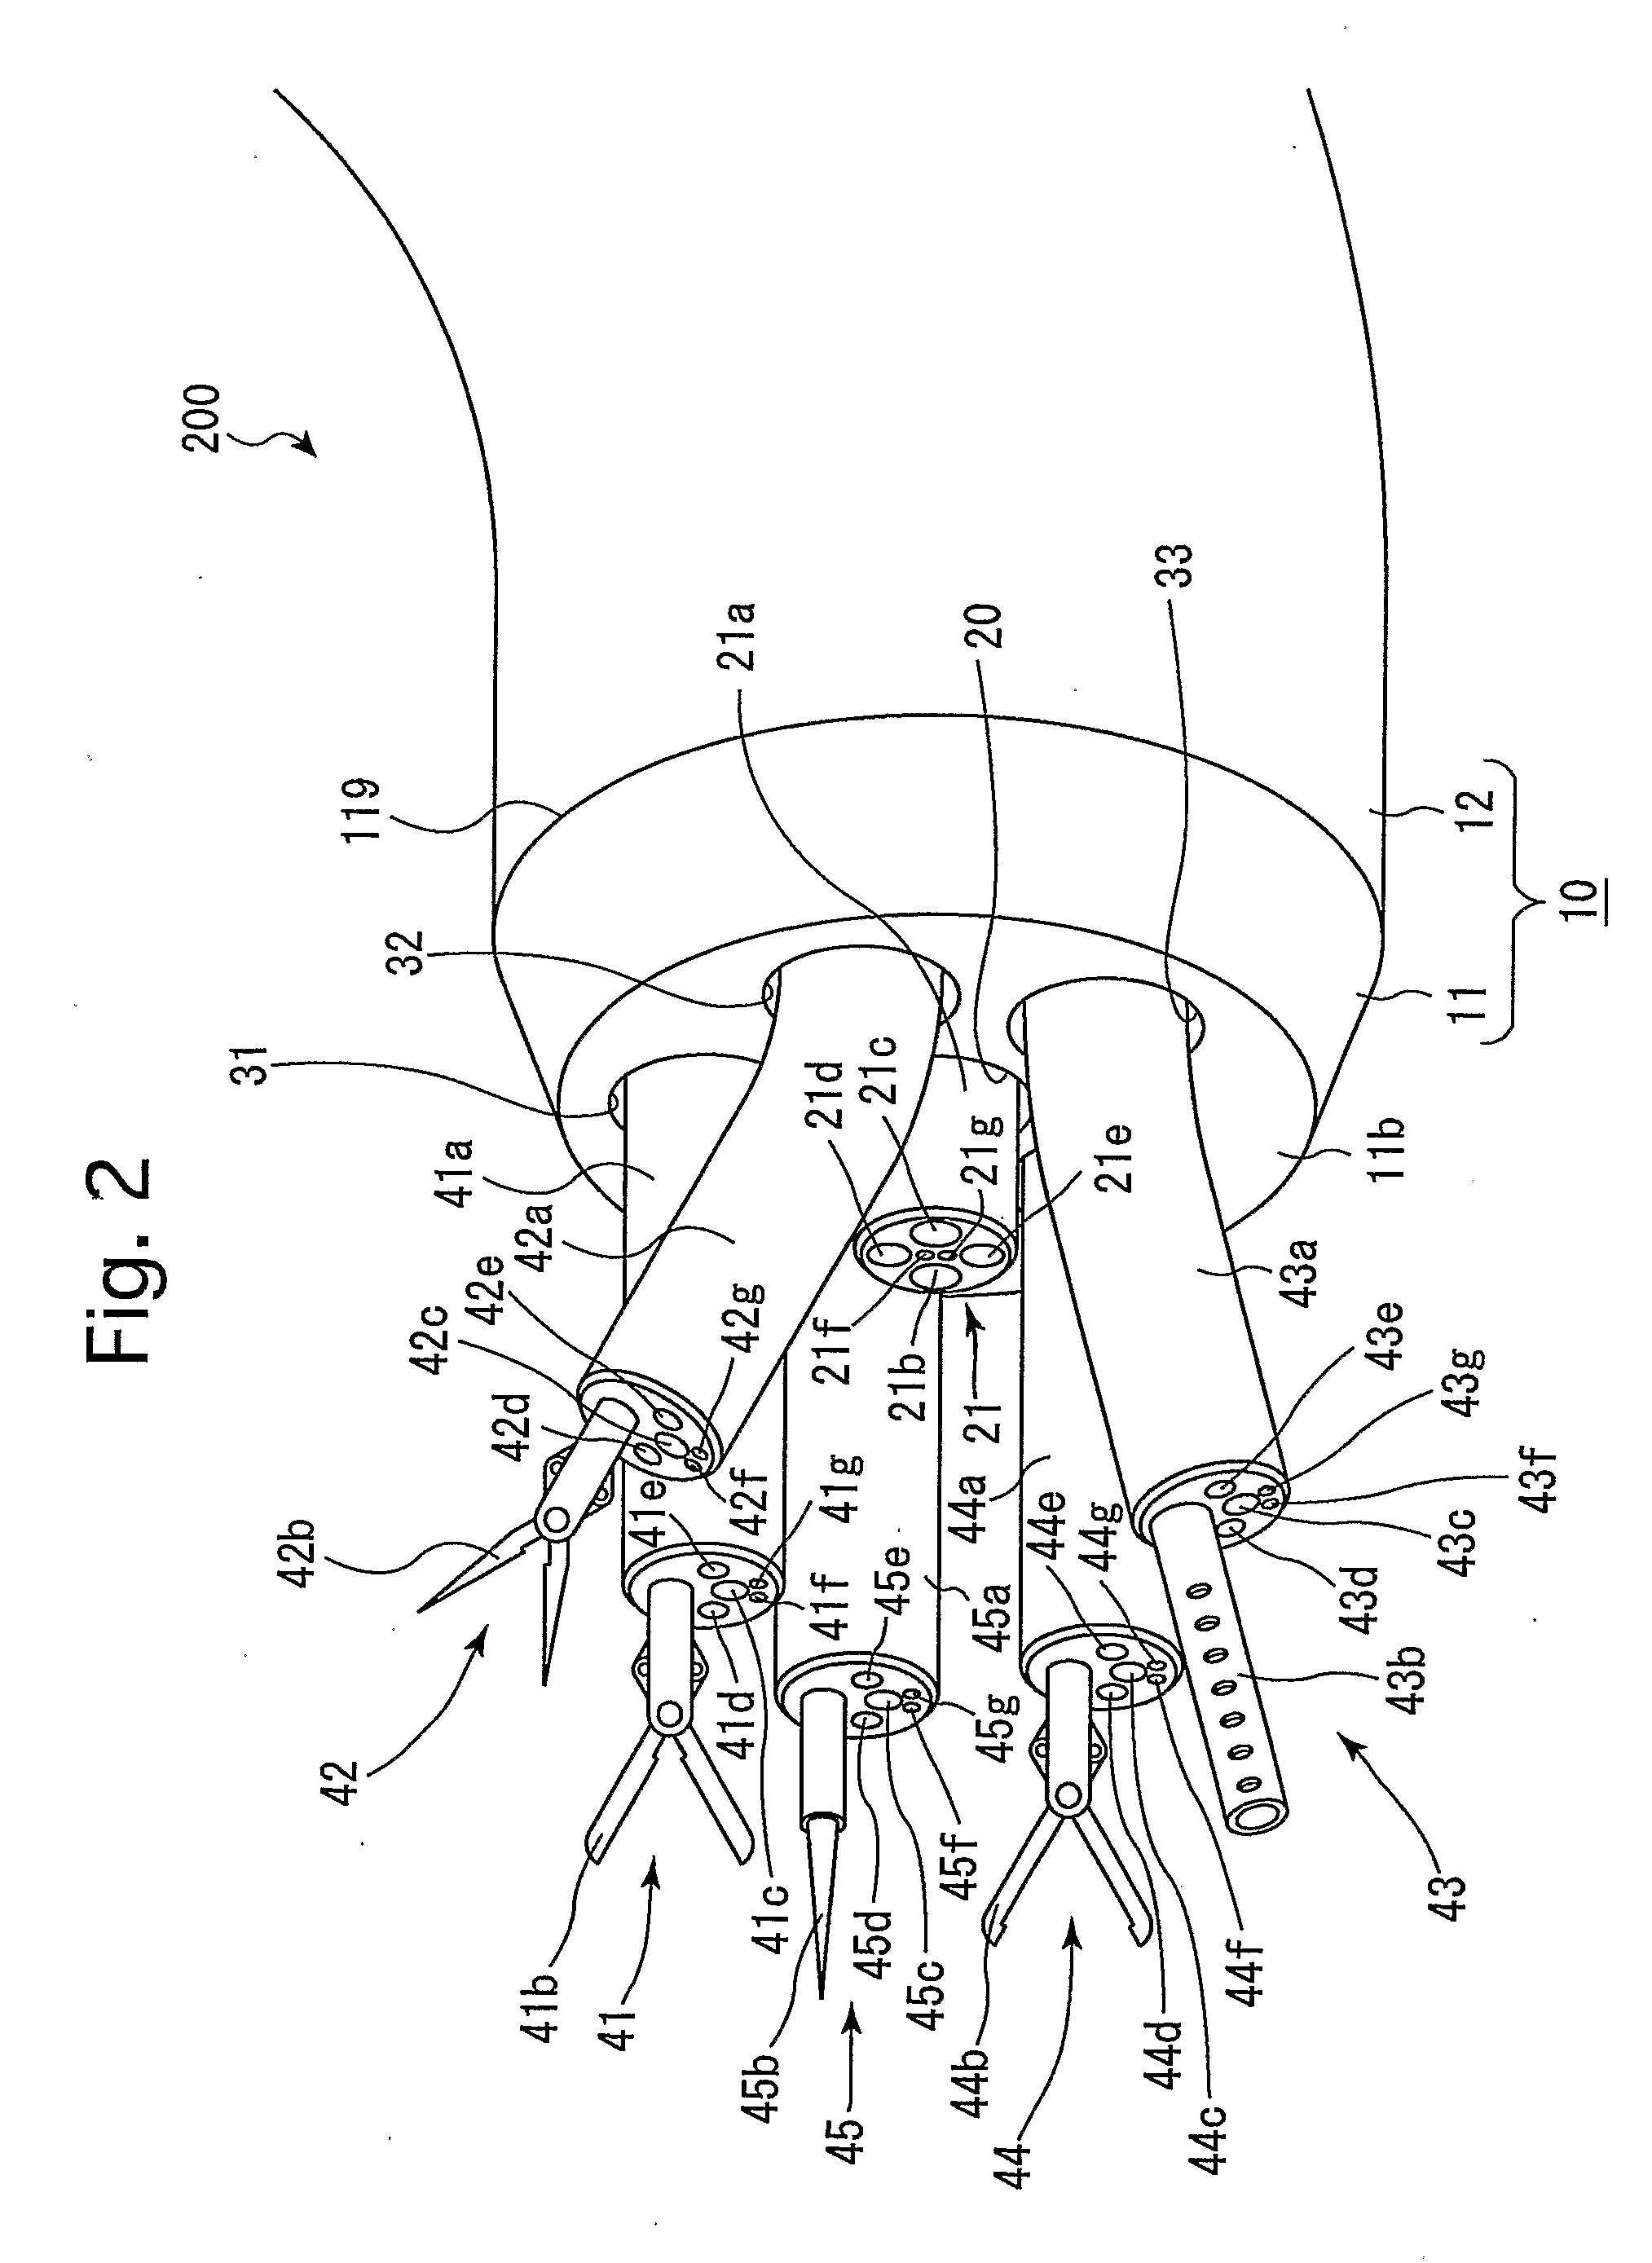 Internal Treatment Apparatus for a Patient and an Internal Treatment System for a Patient